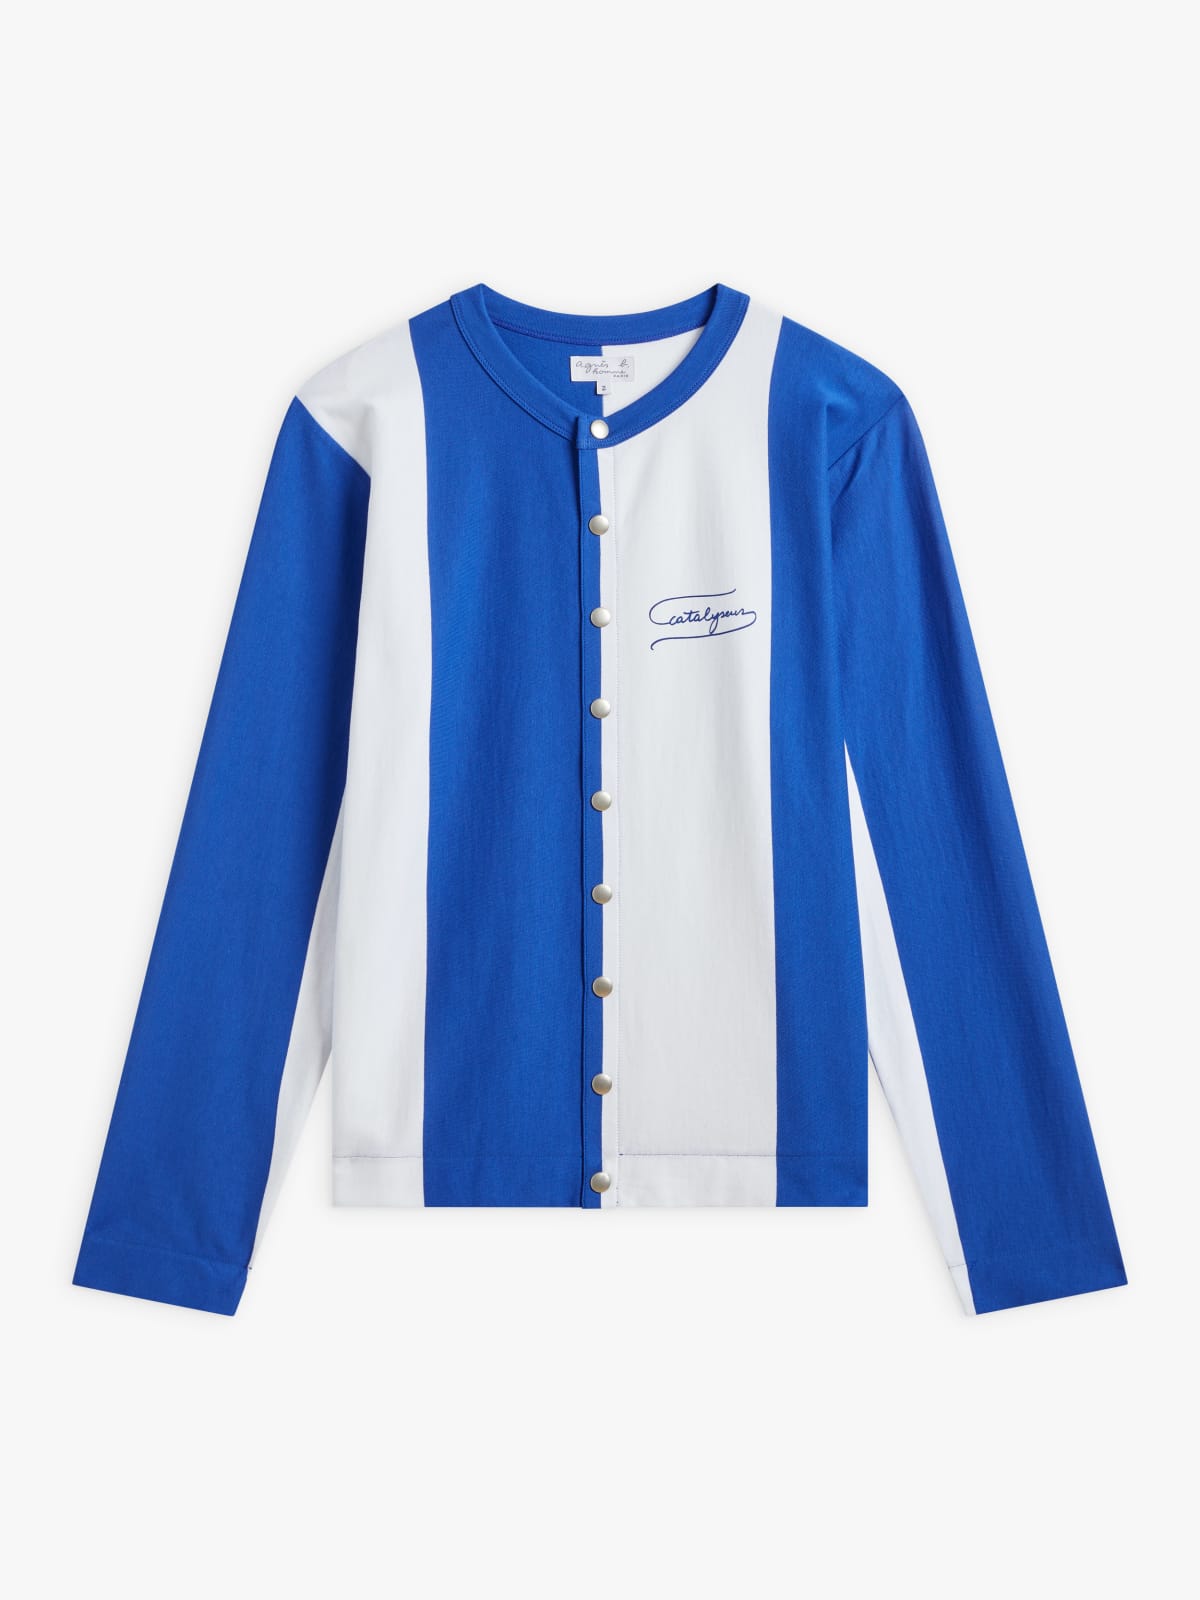 blue and white striped cotton jersey cardigan